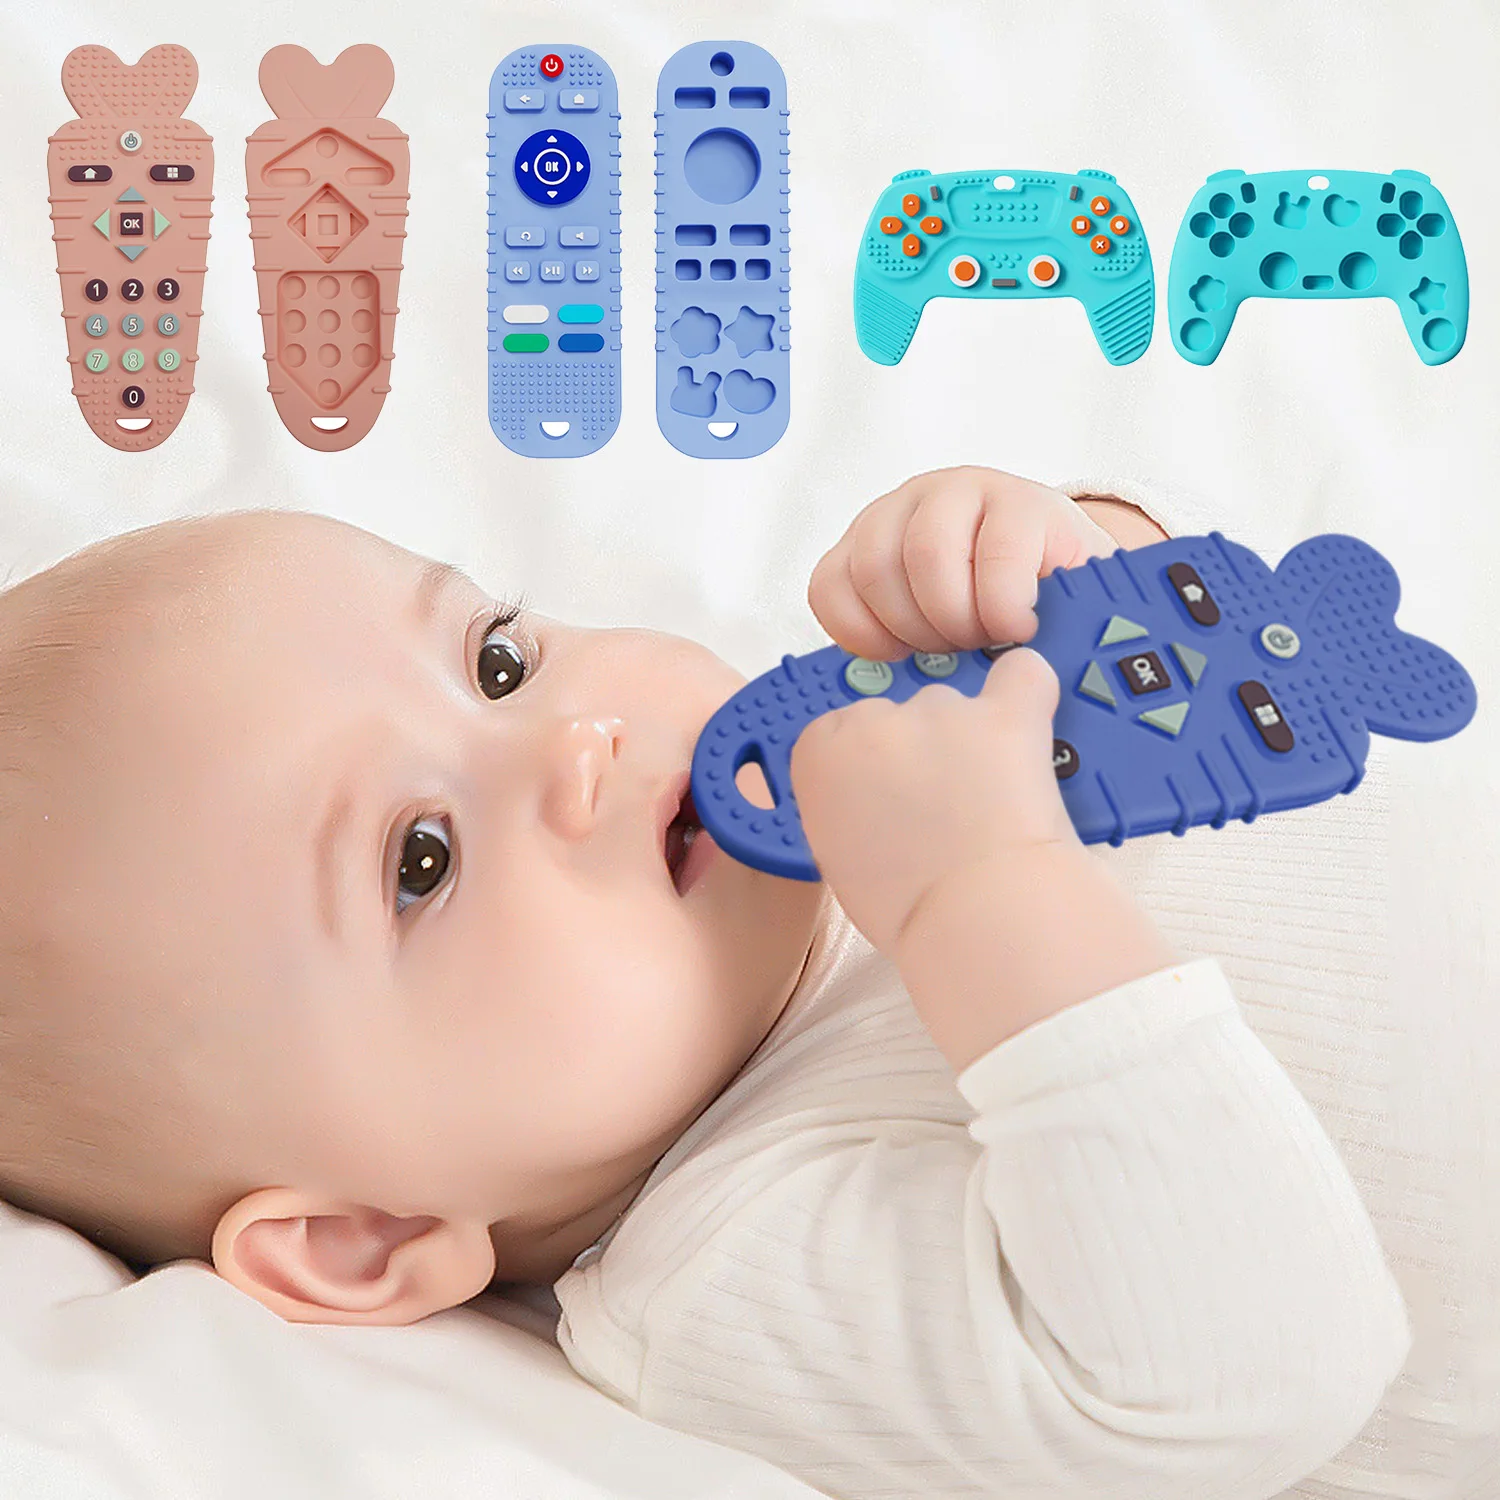 

Silicone Newborn Baby Teething Toys for Babies 6-18M BPA Free Remote Control Shape Teethers Infant Relief Soothe Chew Toys Gifts